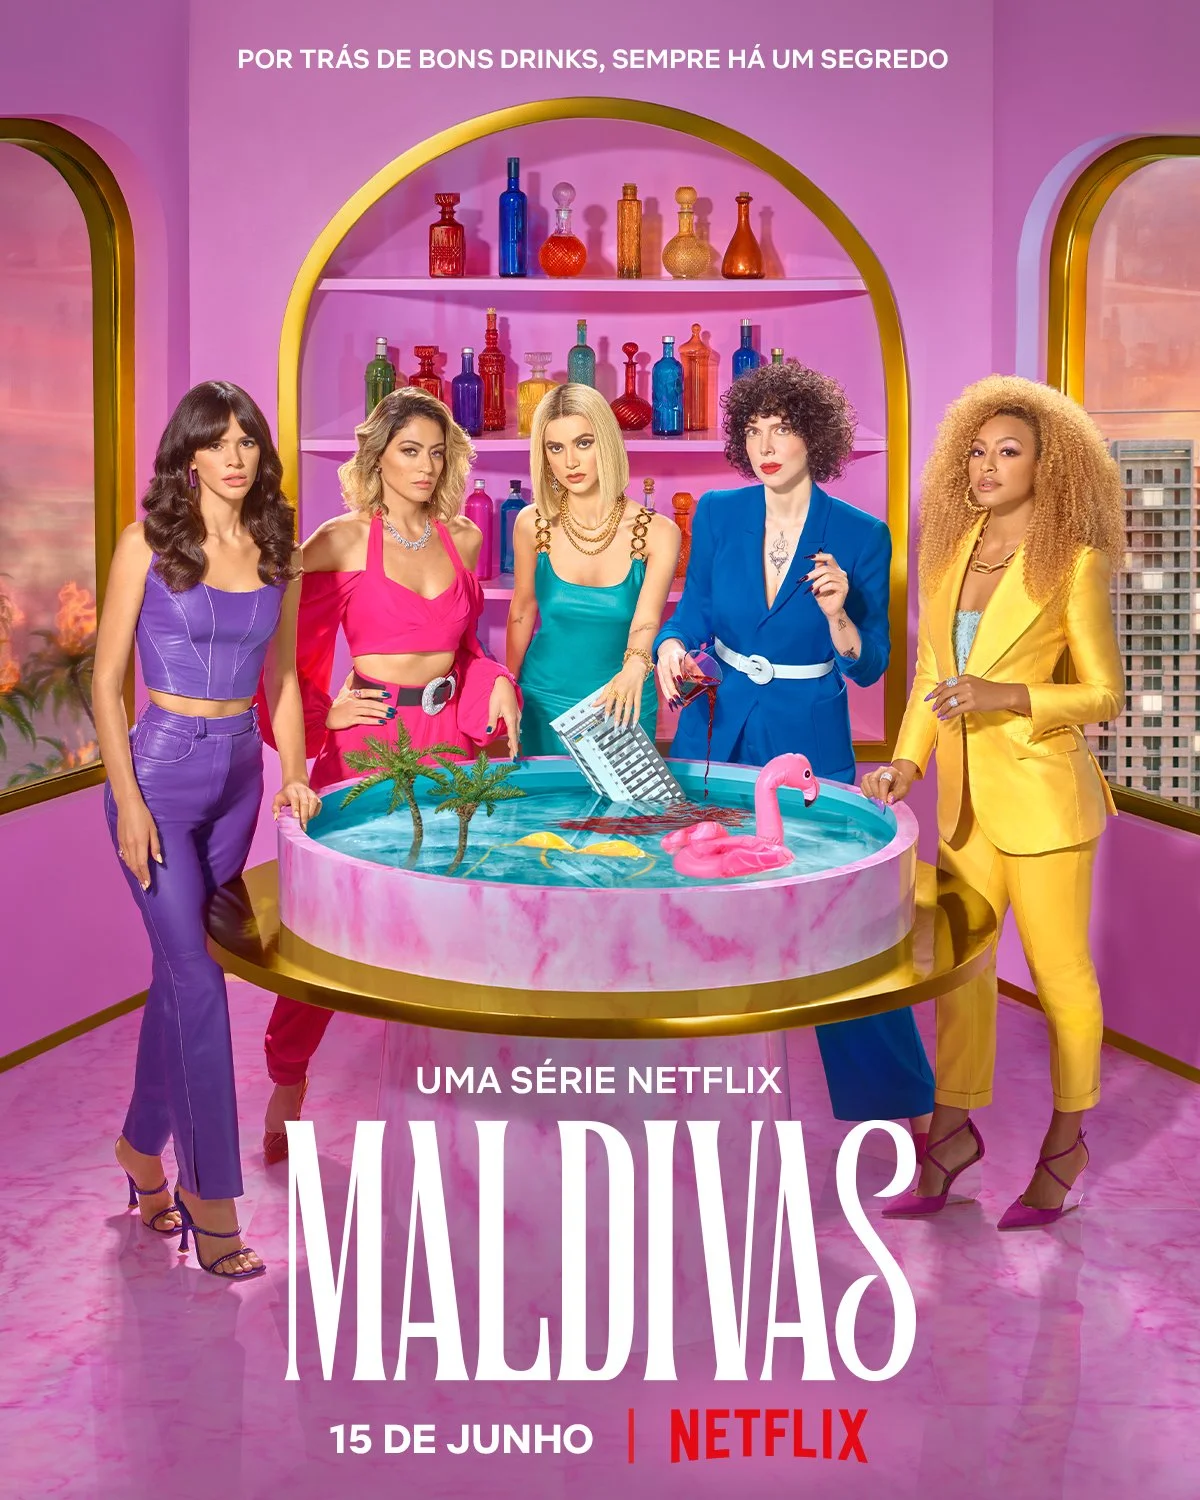 'Maldivas' releases Official Trailer, it's coming to Netflix on June 15